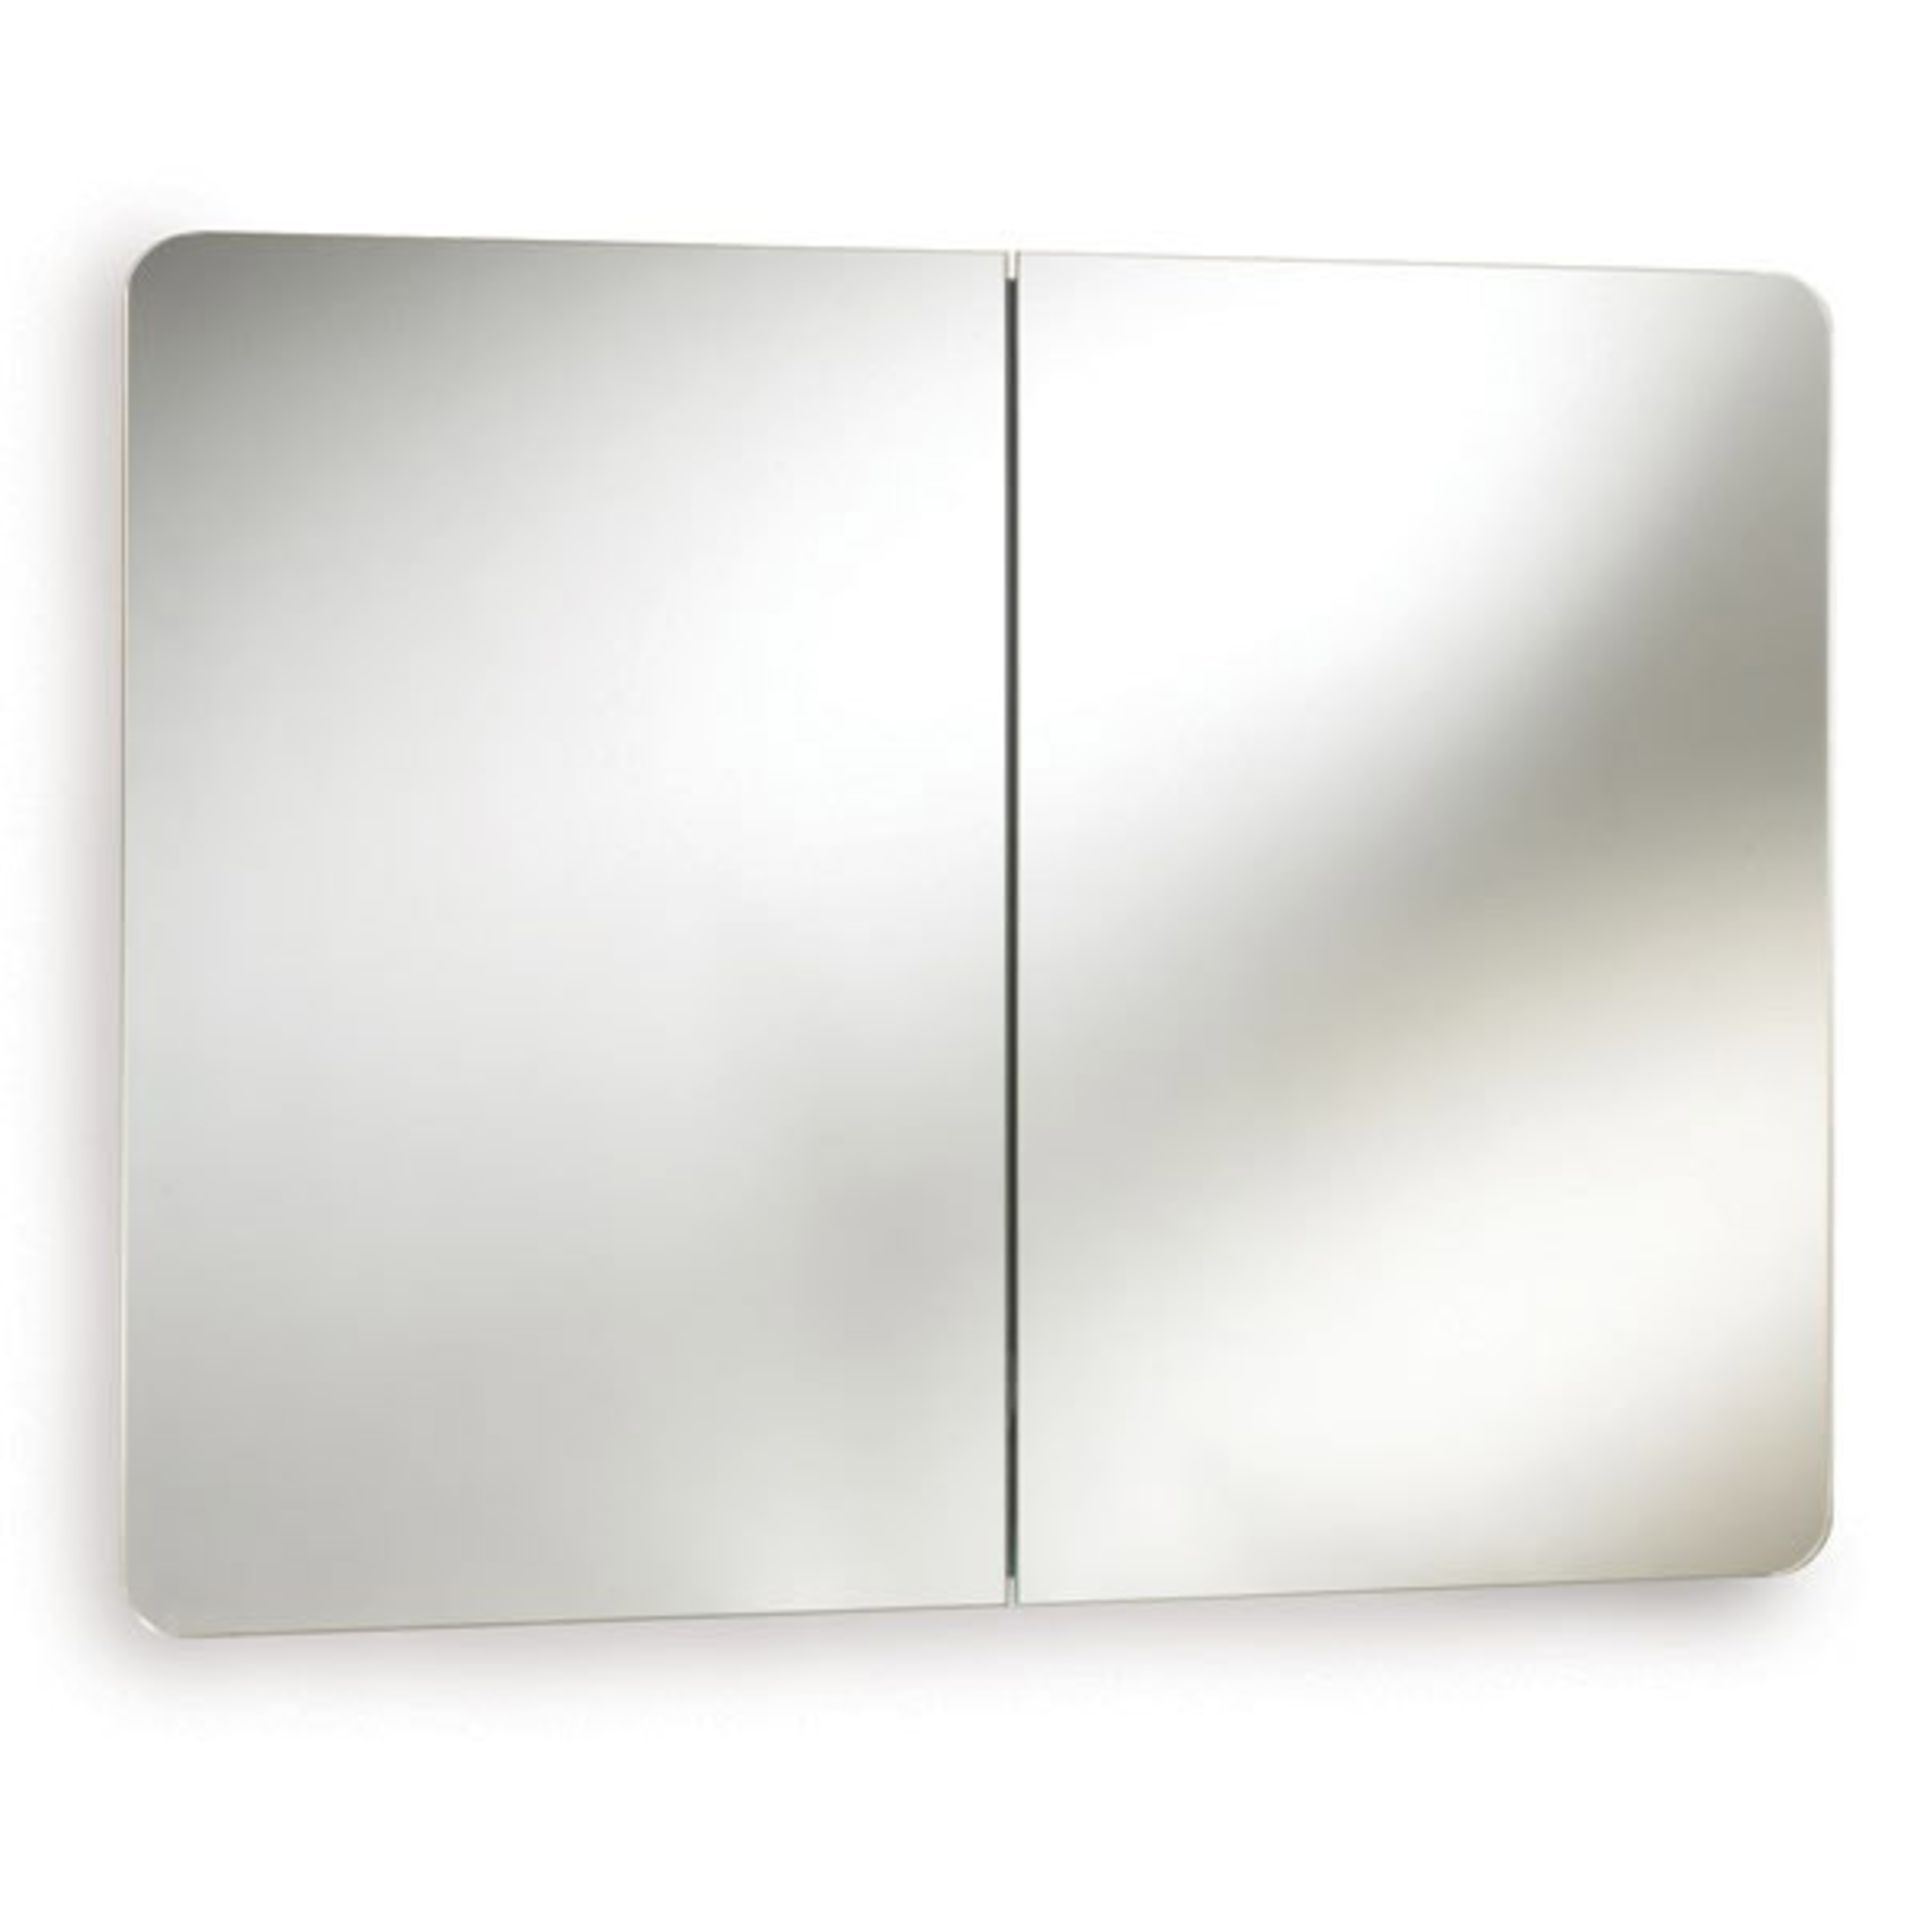 1 x Premier Mimic Hinged Mirror Cabinet 800 x 600mm - New & Boxed Stock - Ref: LQ383 - Image 3 of 3